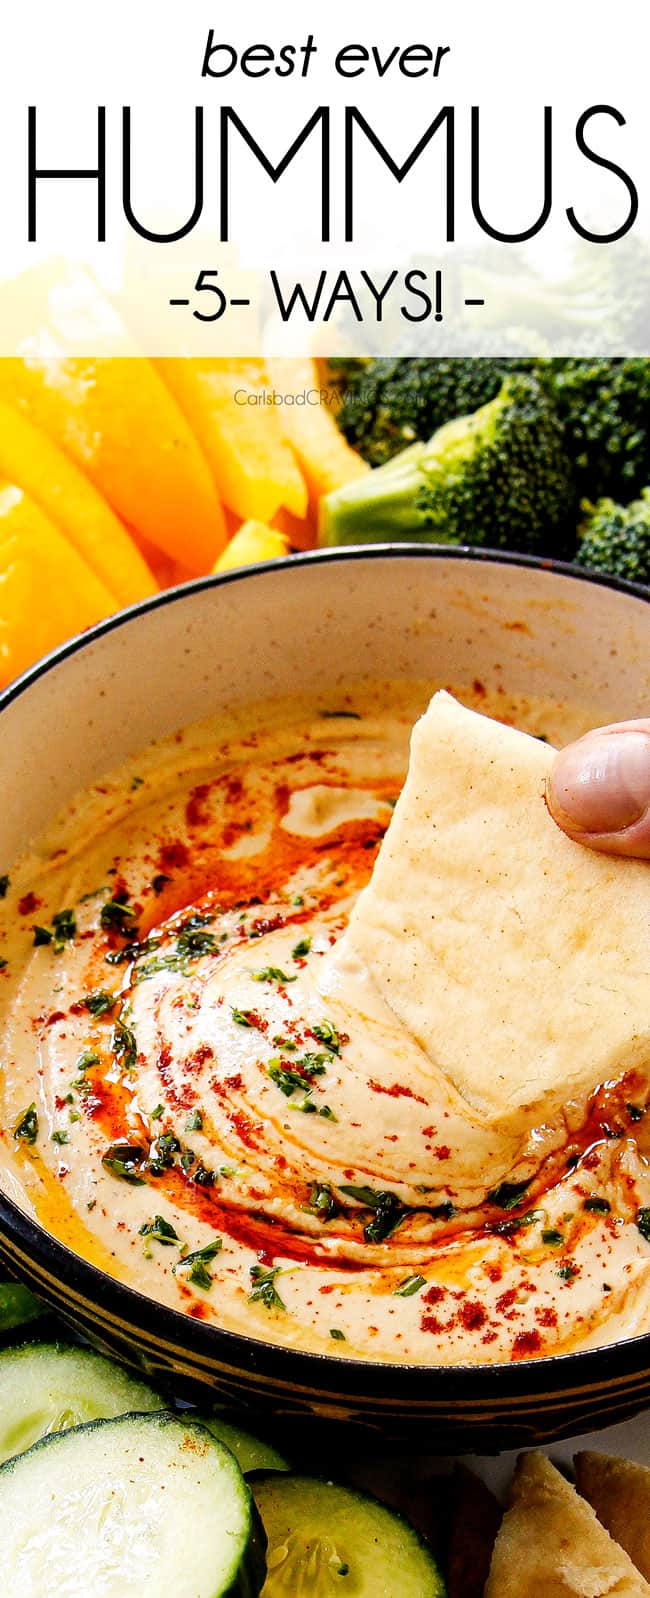 up close of dipping pita into hummus recipe in a black bowl